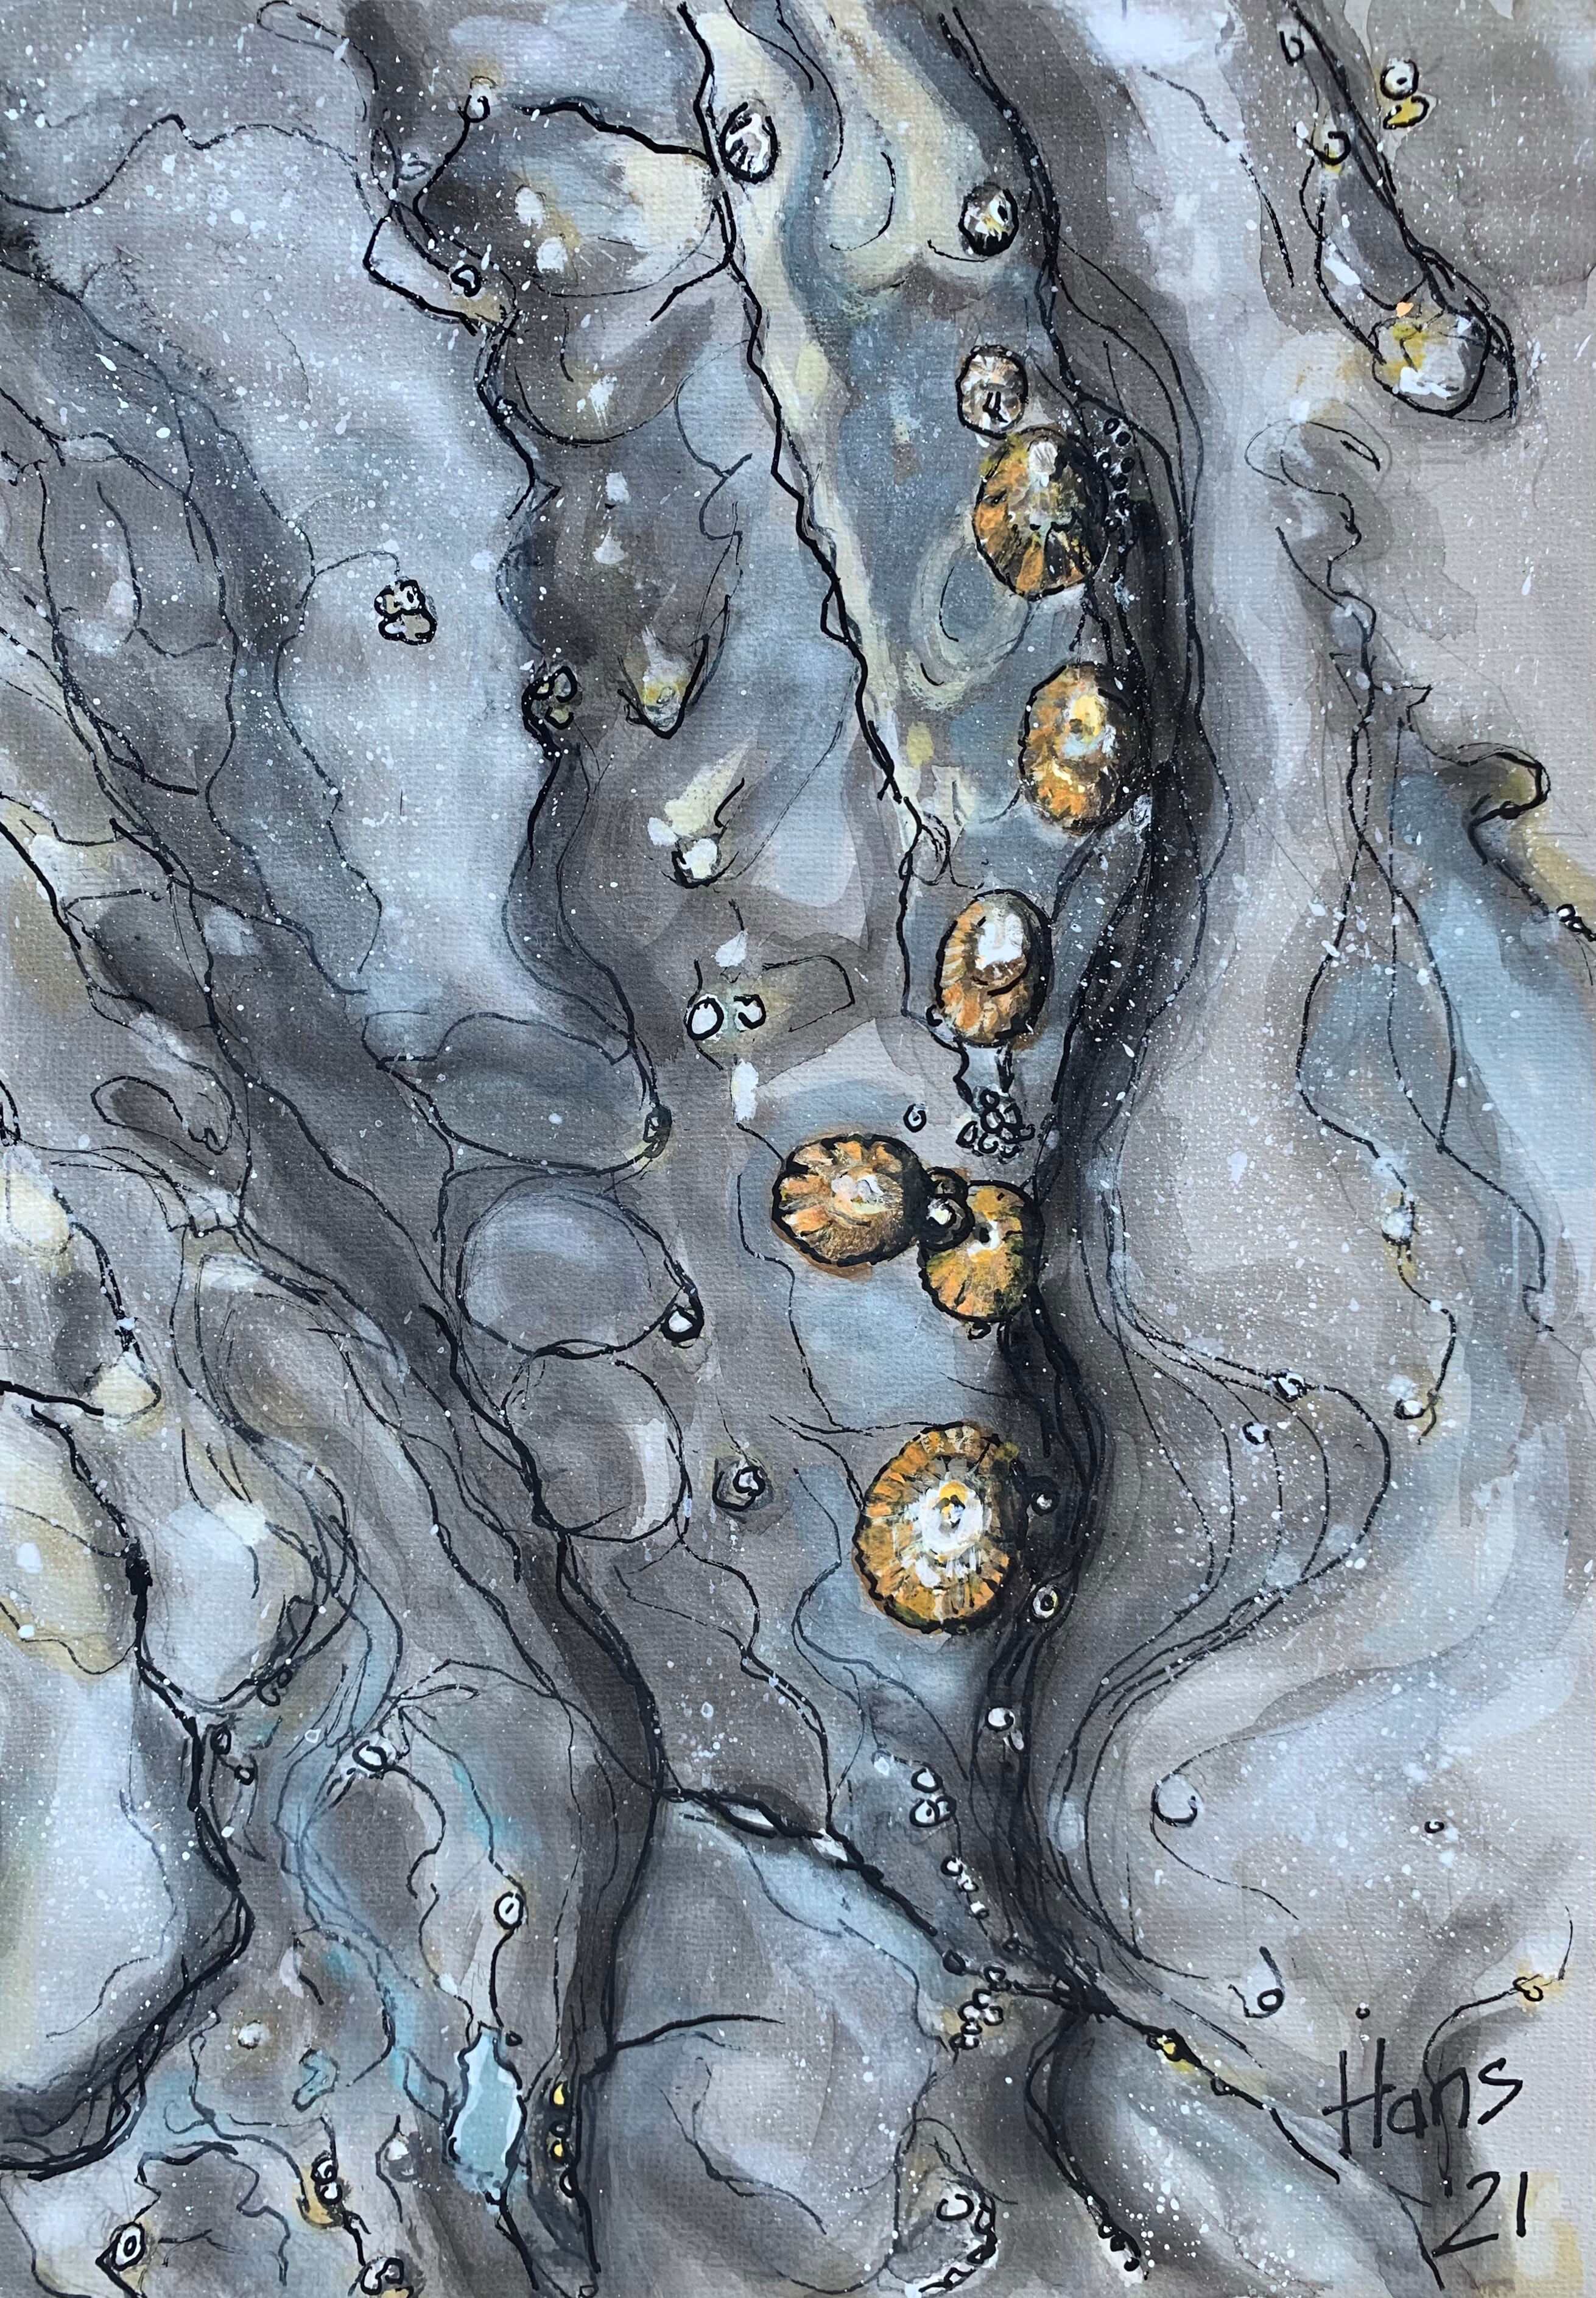 29_Hans Van Weerd_Limpets and Barnacles waiting for the Tide_Ink, watercolour and gouache